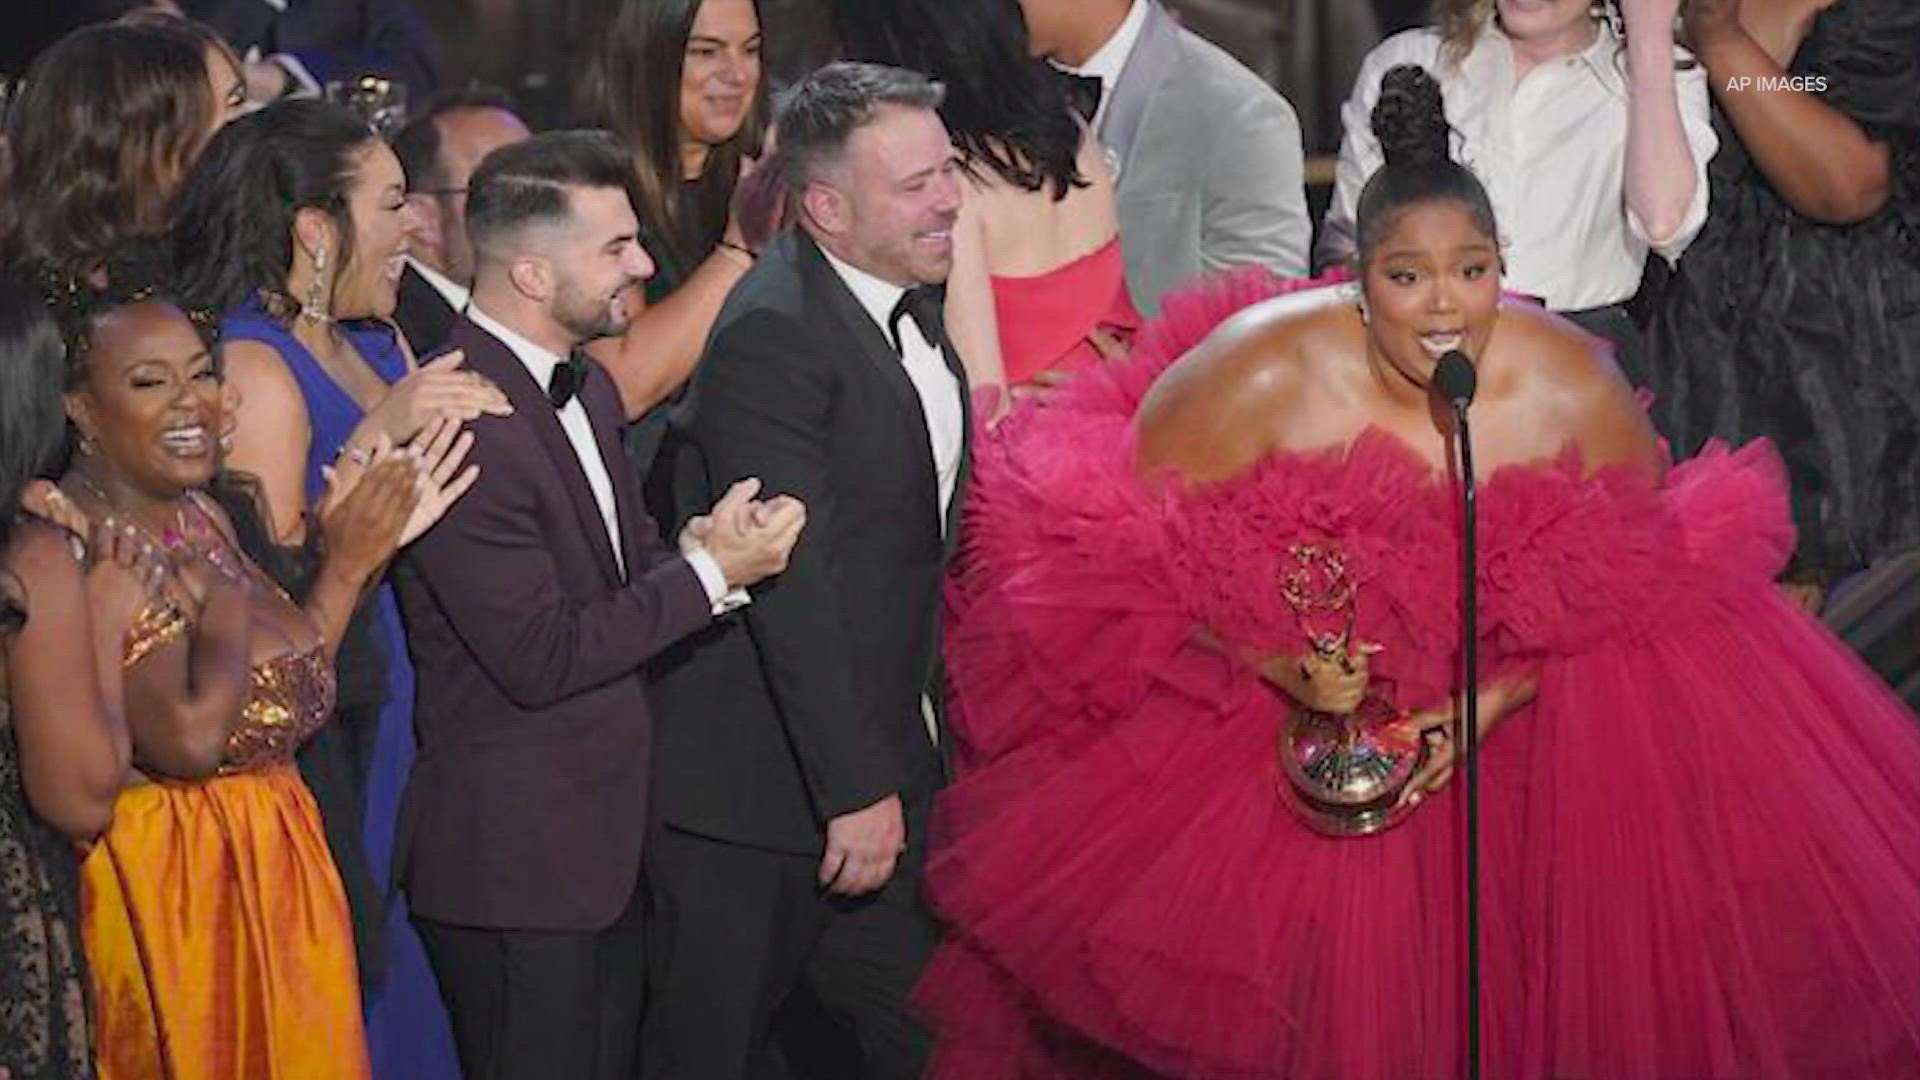 "When I was a little girl, all I wanted to see was me in the media, someone fat like me. black like me, beautiful like me," Lizzo said as she accepted the award.